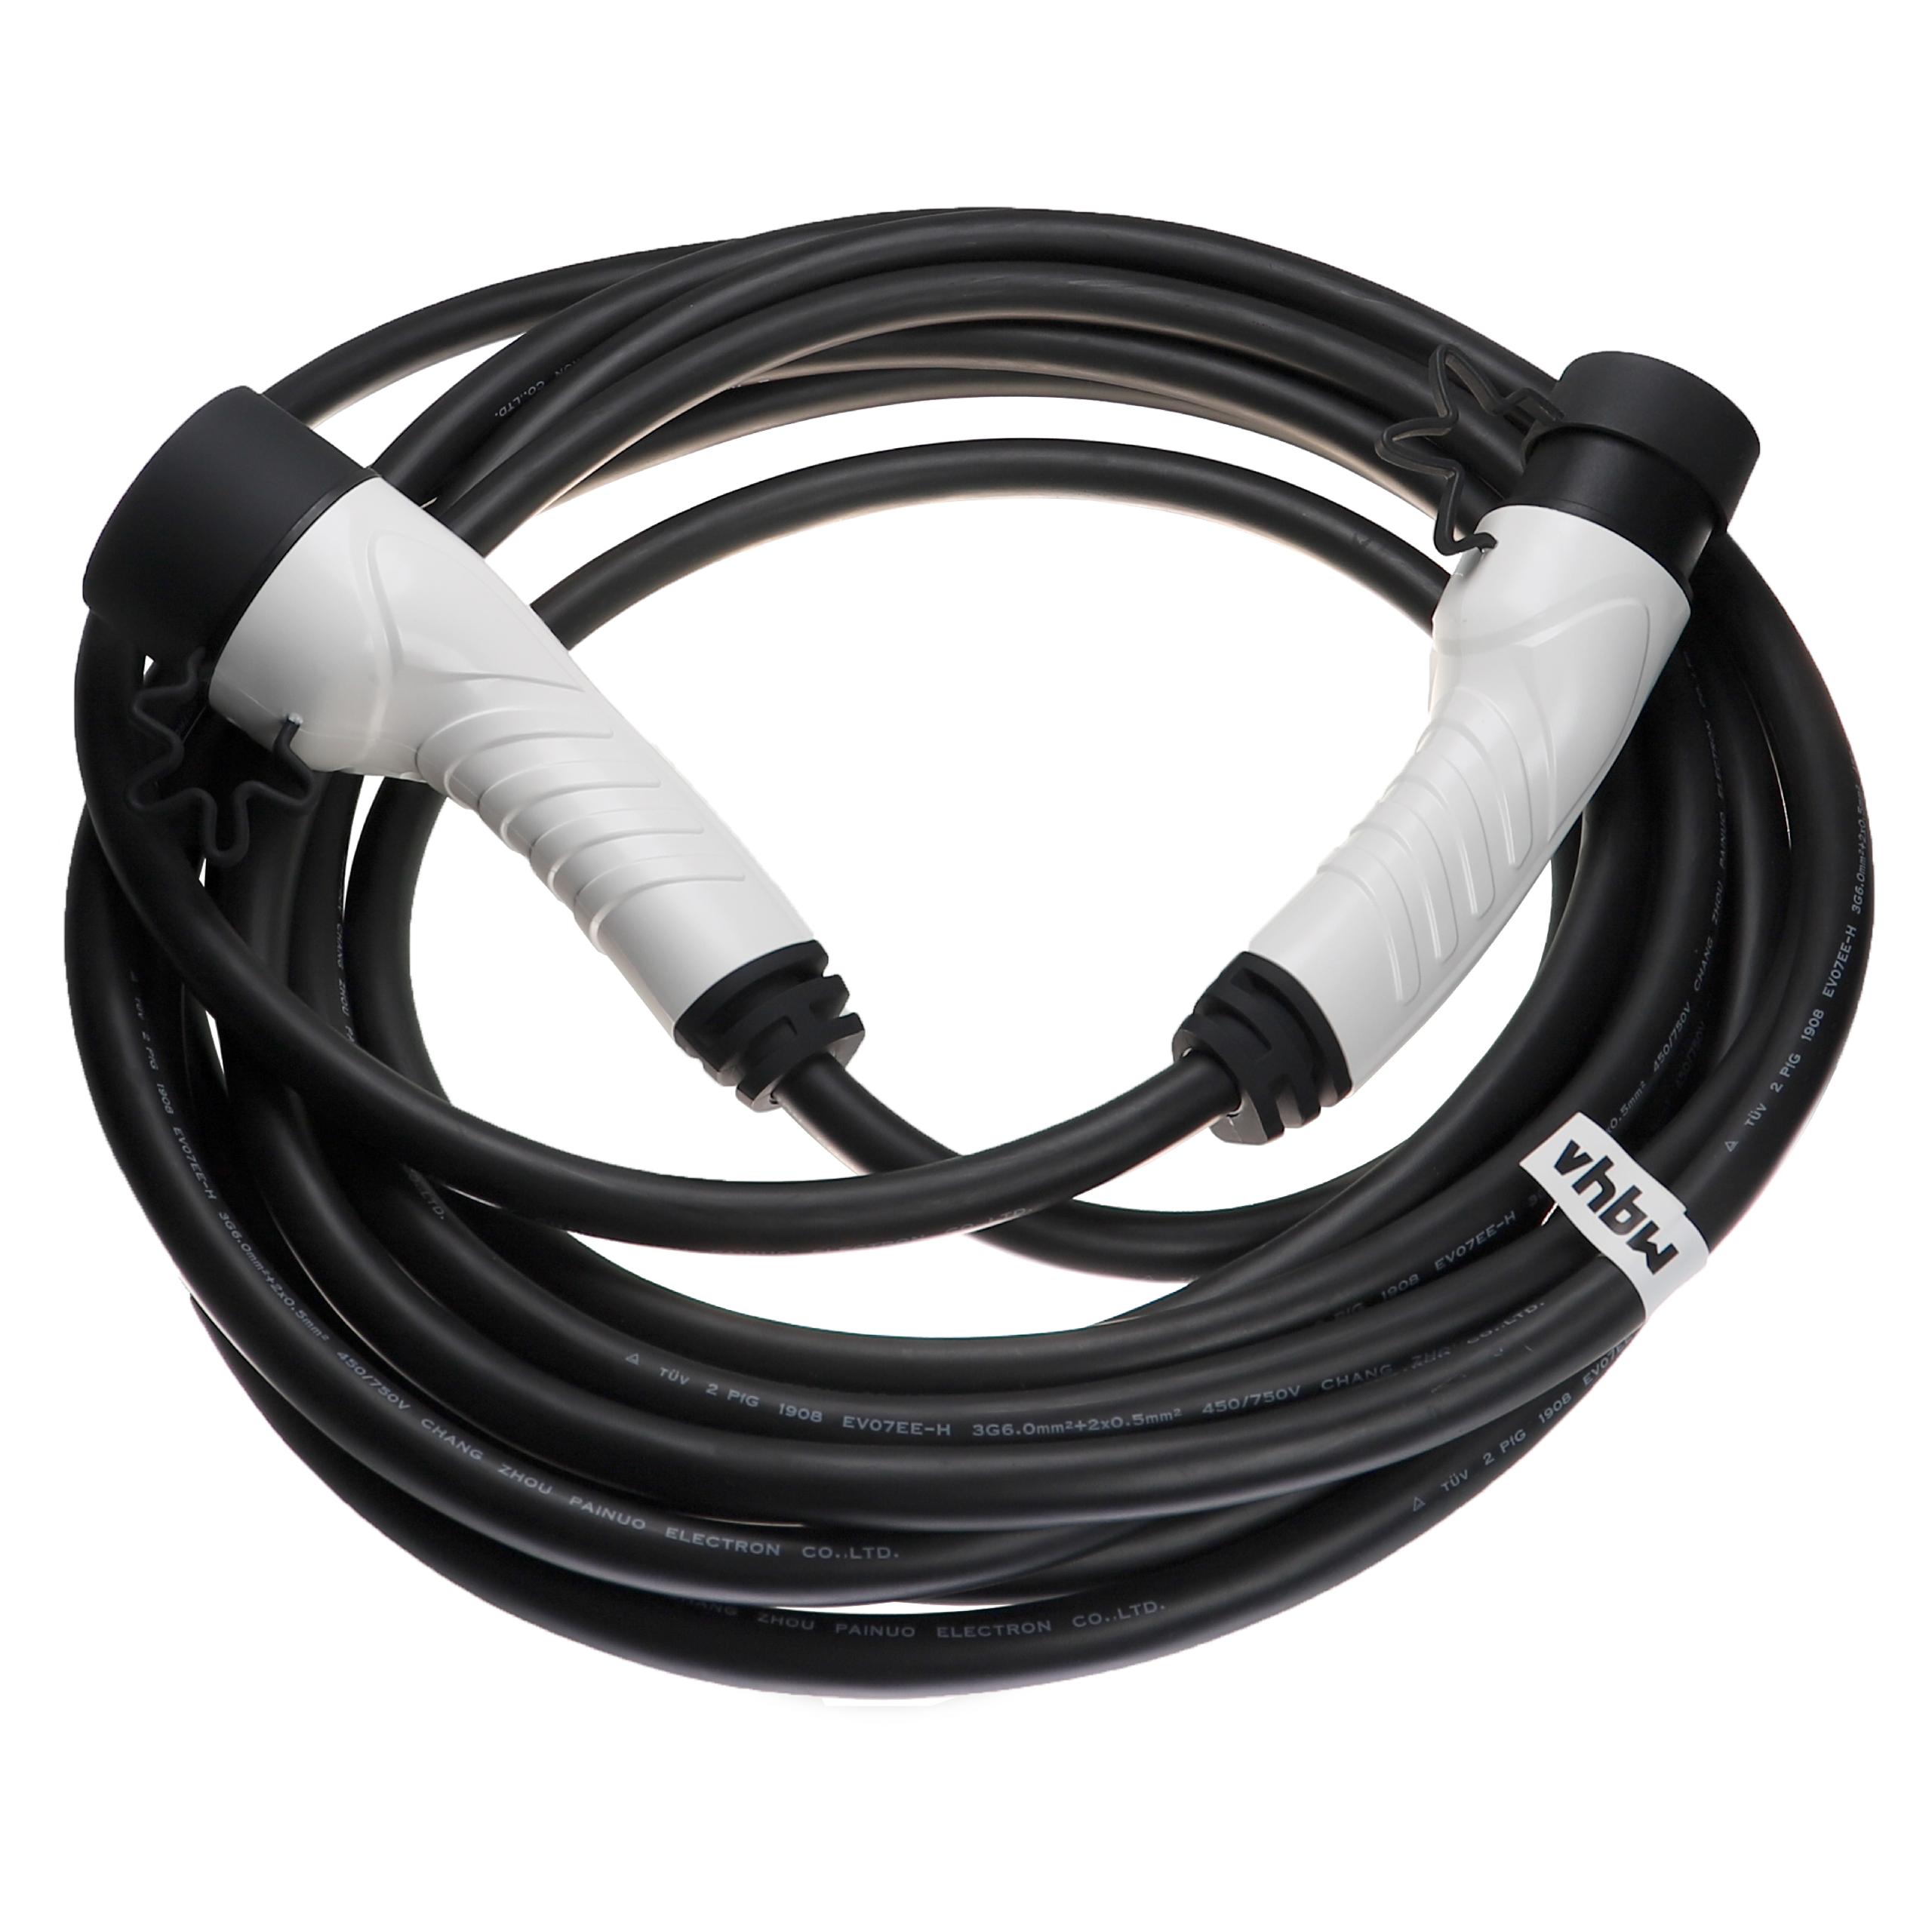 Charging Cable for Electric Car, Plug-In Hybrid - Type 2 to Type 2 Cable, Single-Phase, 32 A, 7 kW, 10 m